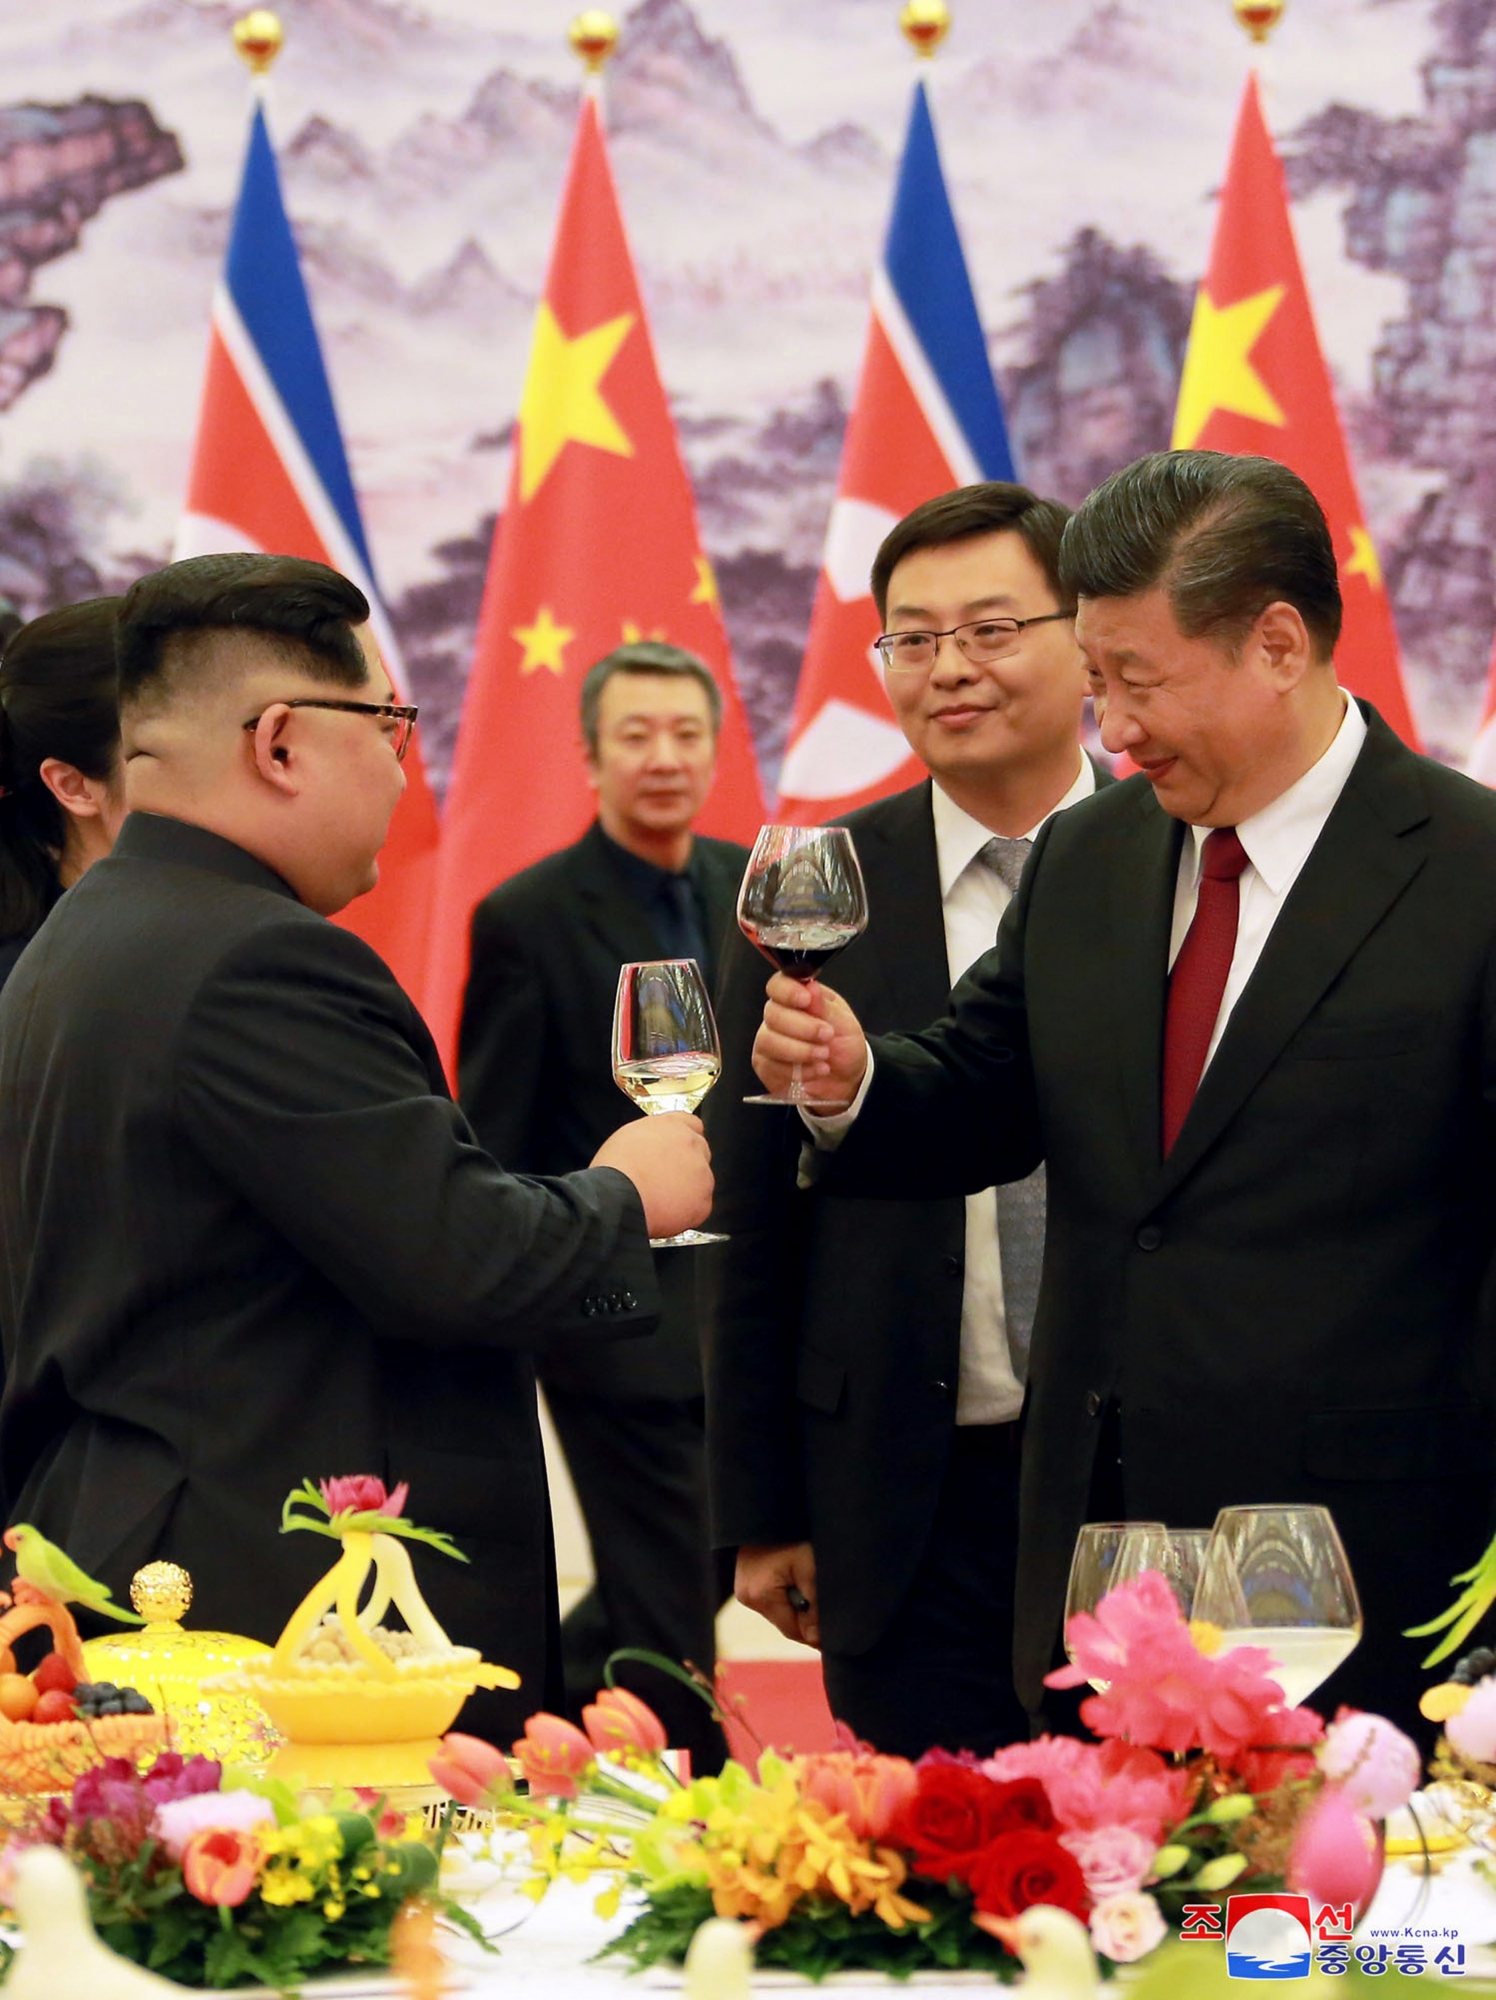 In this March 26, 2018, photo, North Korean leader Kim Jong Un, left, and Chinese counterpart Xi Jinping hold a glass for a toast during a banquet at the Great Hall of the People in Beijing. North Korea's leader Kim and his Chinese counterpart Xi sought to portray strong ties between the long-time allies despite a recent chill as both countries on Wednesday, March 28, 2018, confirmed Kim's secret trip to Beijing this week. The content of this image is as provided and cannot be independently verified. Korean language watermark on image as provided by source reads: "KCNA" which is the abbreviation for Korean Central News Agency.  (Korean Central News Agency/Korea News Service via AP) China North Korea